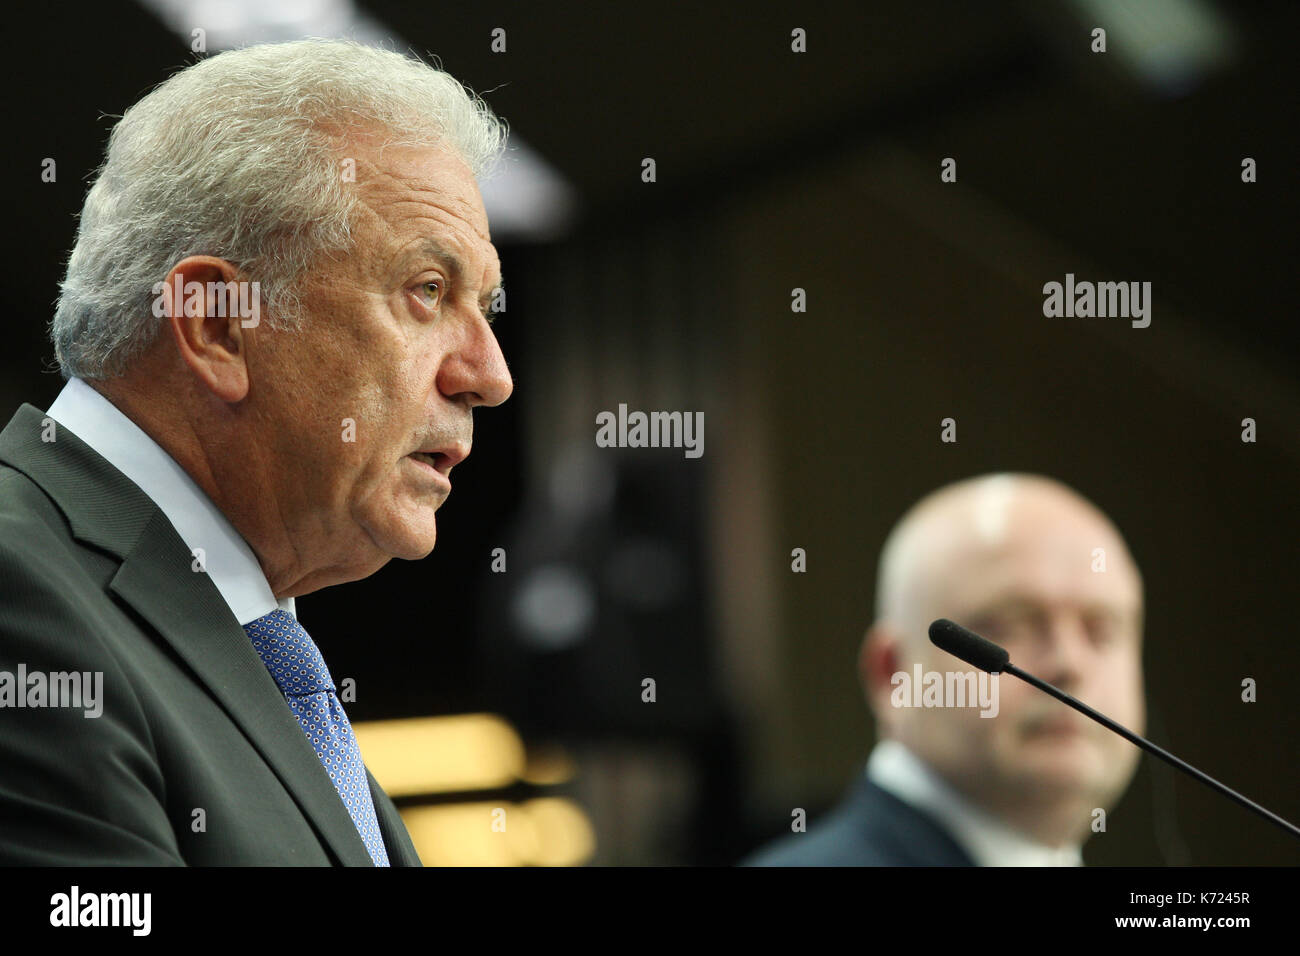 Brussels, Belgium. 14th Sep, 2017. Dimitris Avramopoulos European Commissioner for Migration and Citizenship during the press conference Credit: Leo Cavallo/Alamy Live News Stock Photo